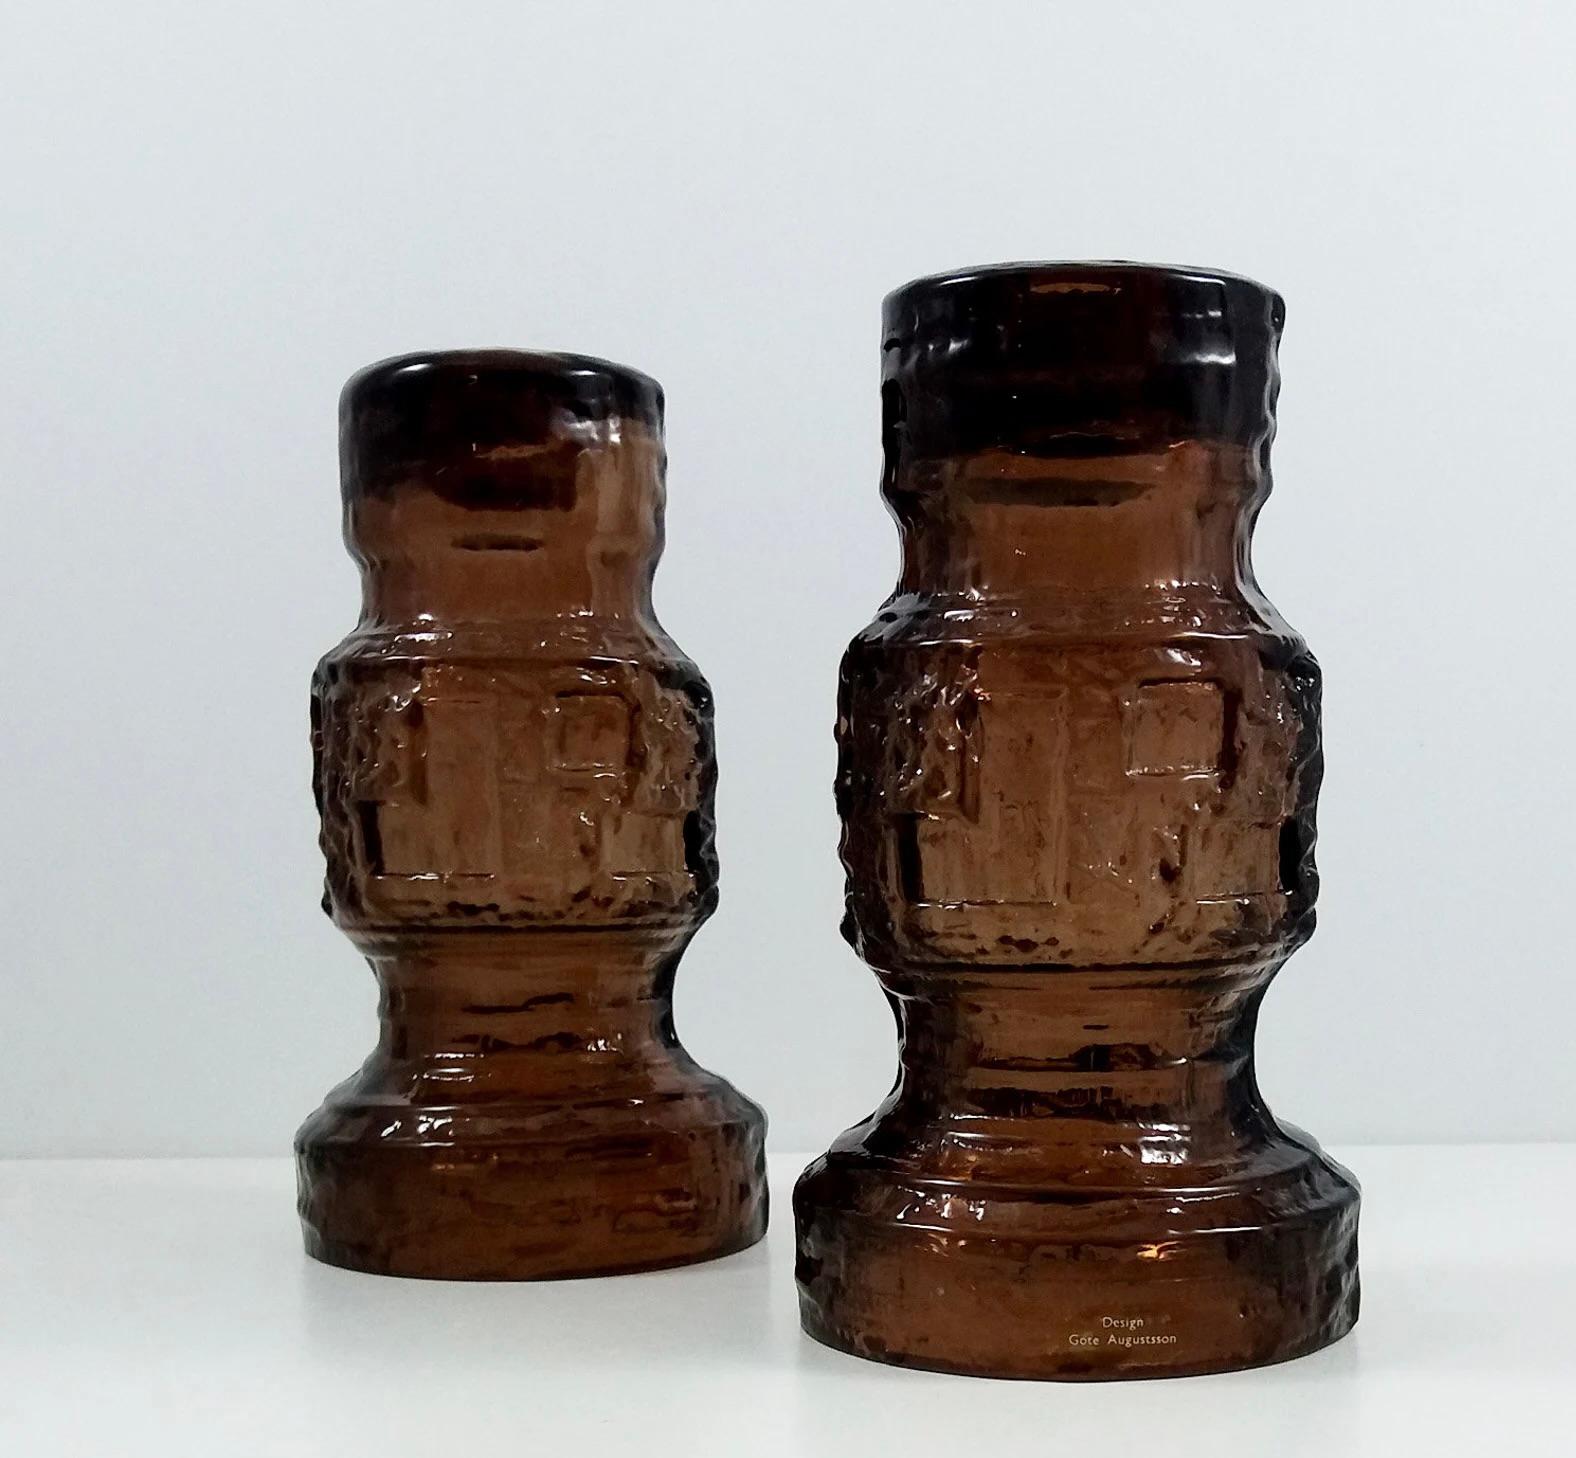 Textured Scandinavian Ruda Glasbruk mid-century brown glass candlesticks In Excellent Condition For Sale In East Quogue, NY